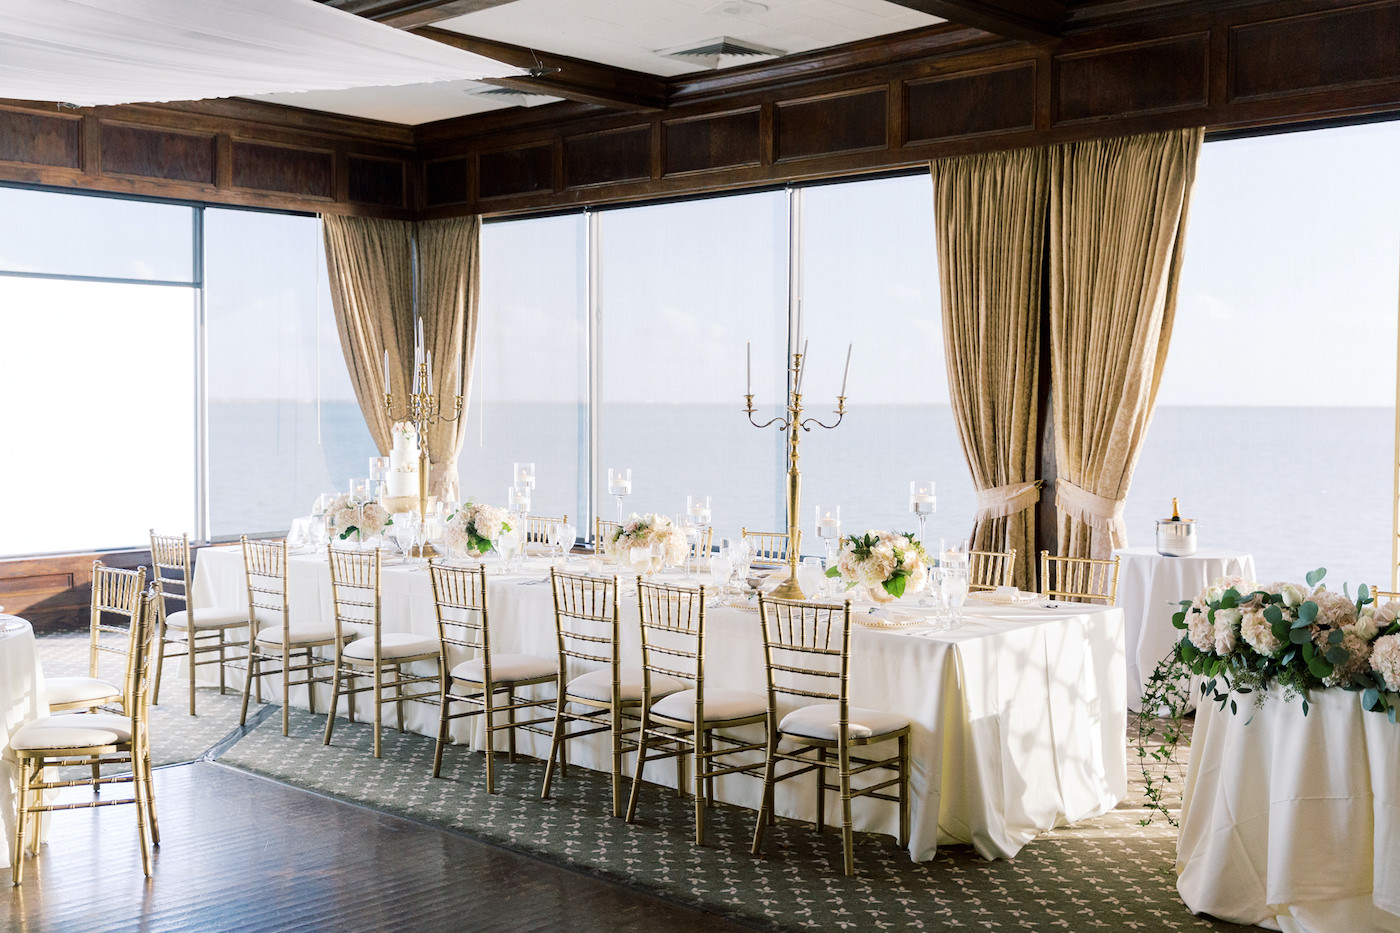 Classic Romantic Wedding Reception Decor, Long Feasting Table with White Linen, Gold Chiavari Chairs, Tall Gold Candelabras | Tampa Bay Wedding Florist, Candelabra Rentals Gabro Event Services | Tampa Bay Wedding Venue The Rusty Pelican